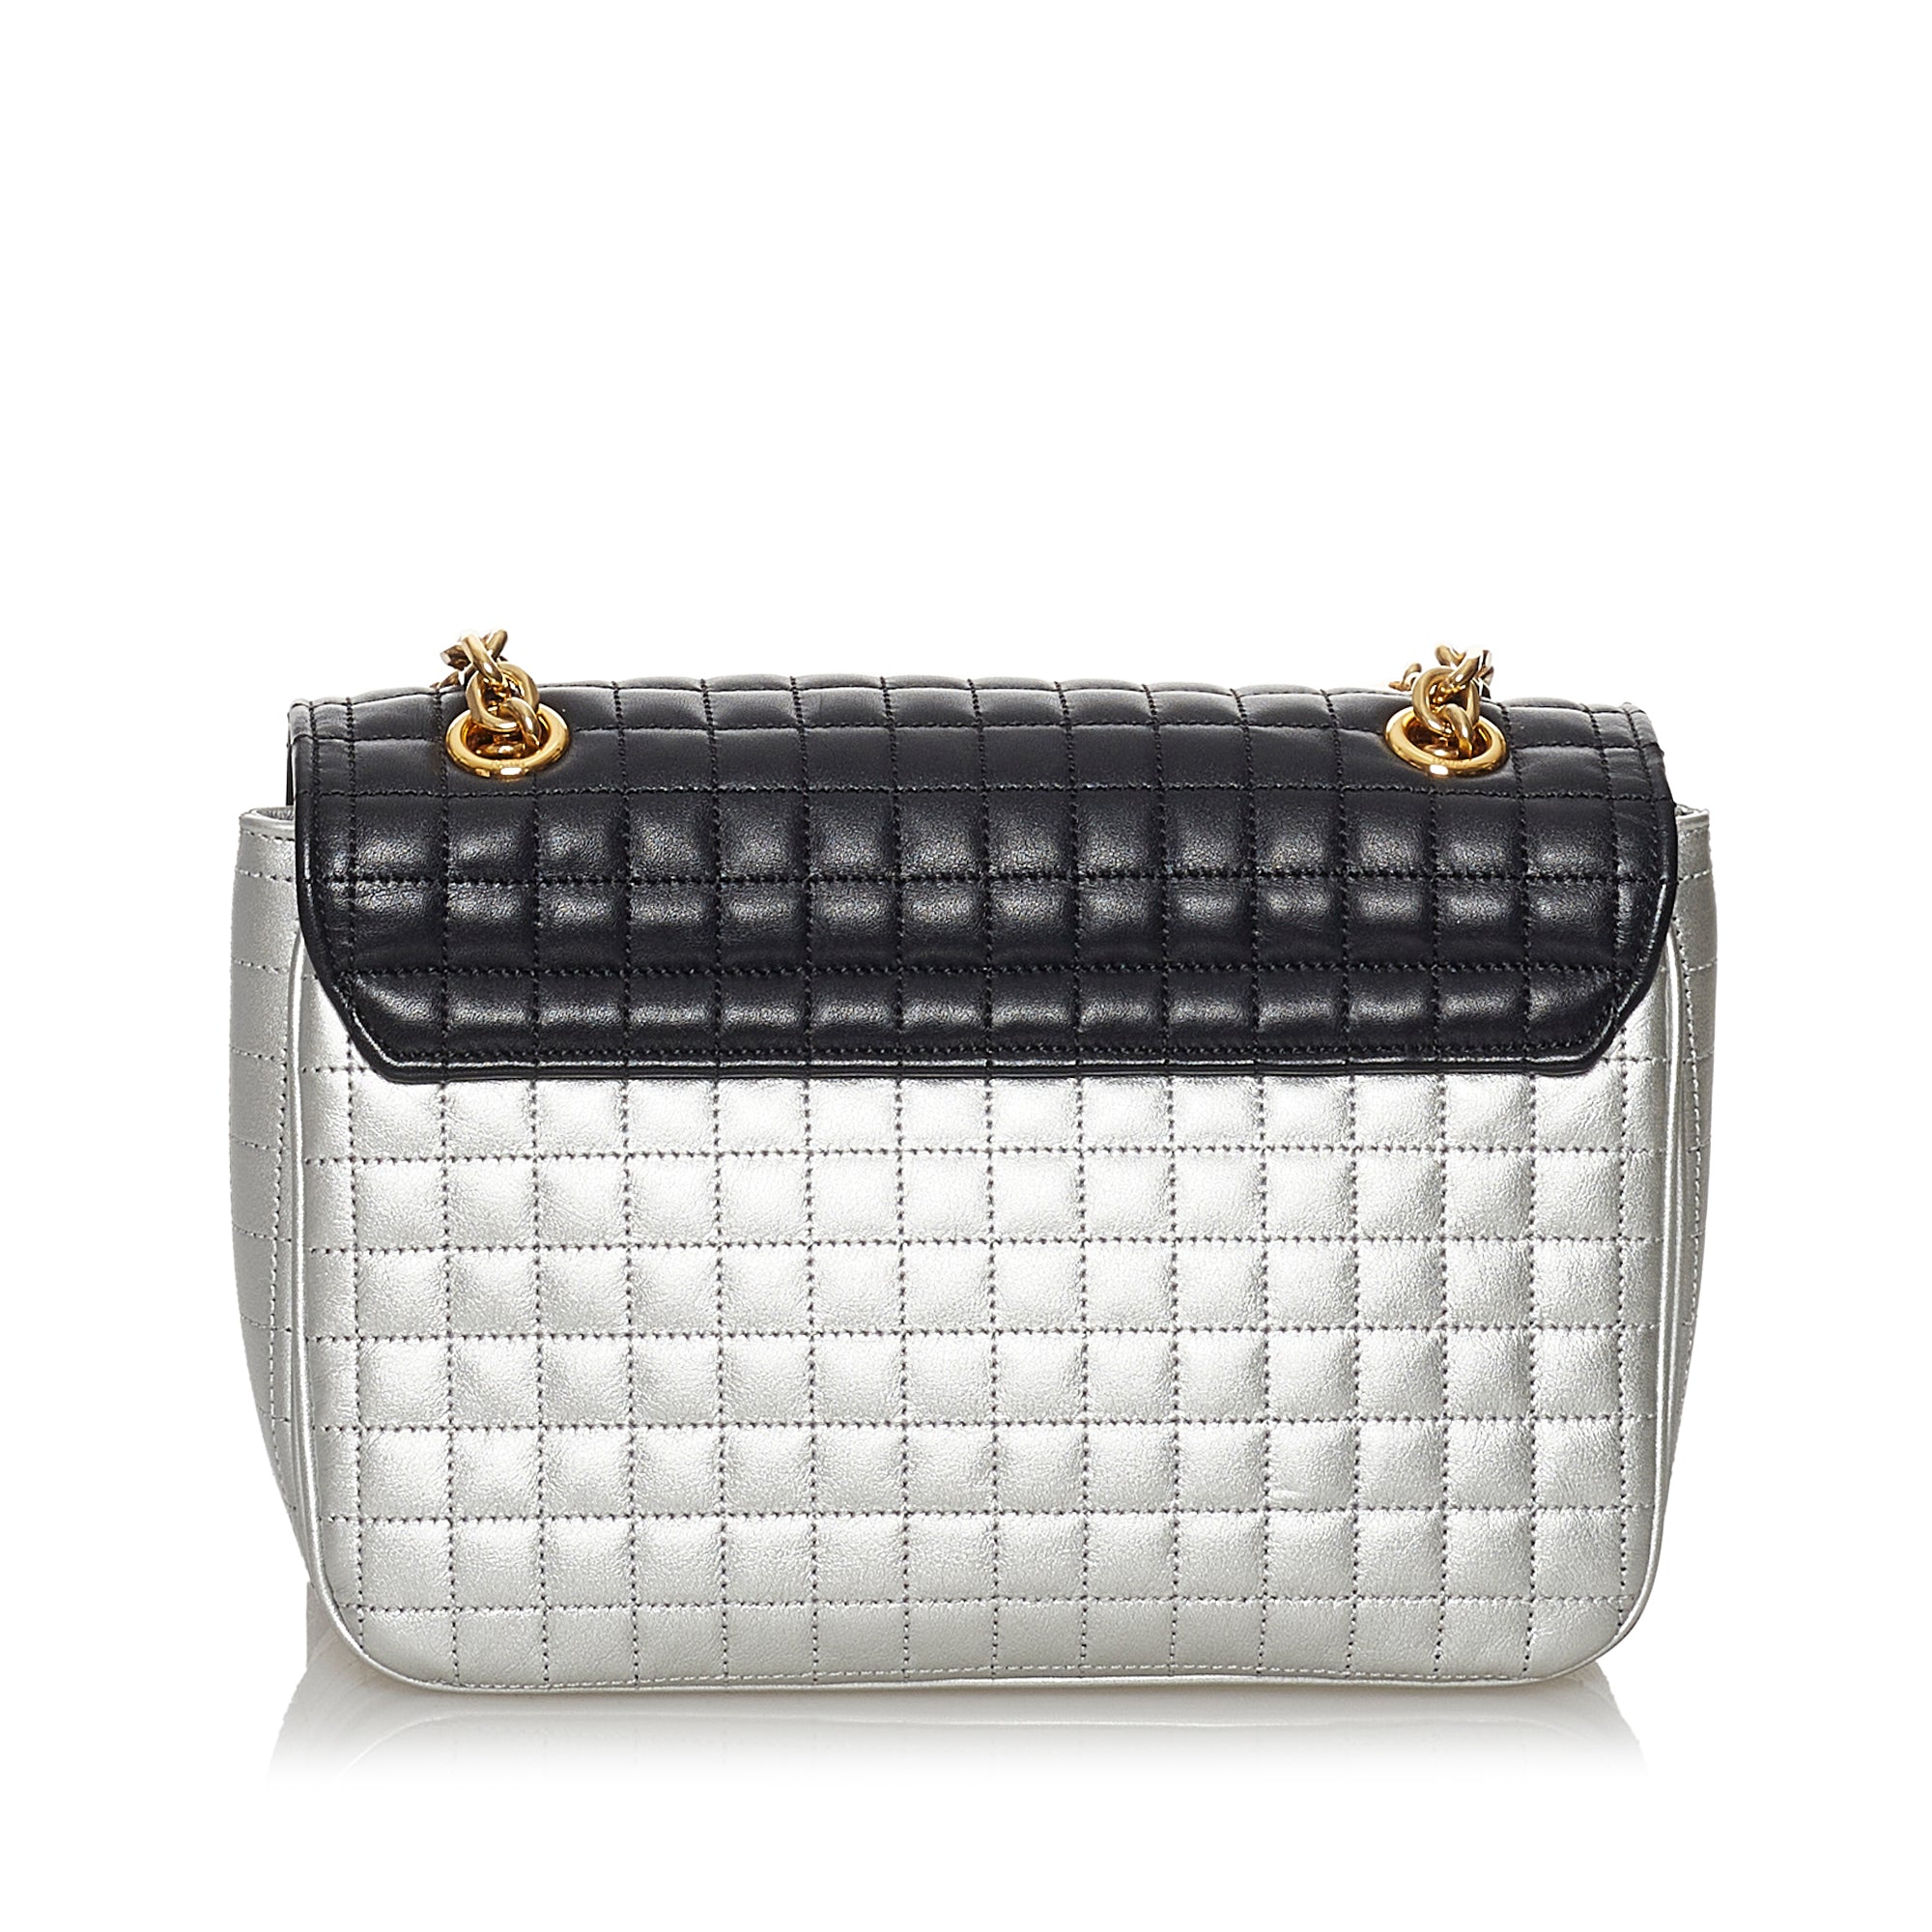 Chanel Gabrielle Shoulder Bag, Silver Quilted Leather, Medium